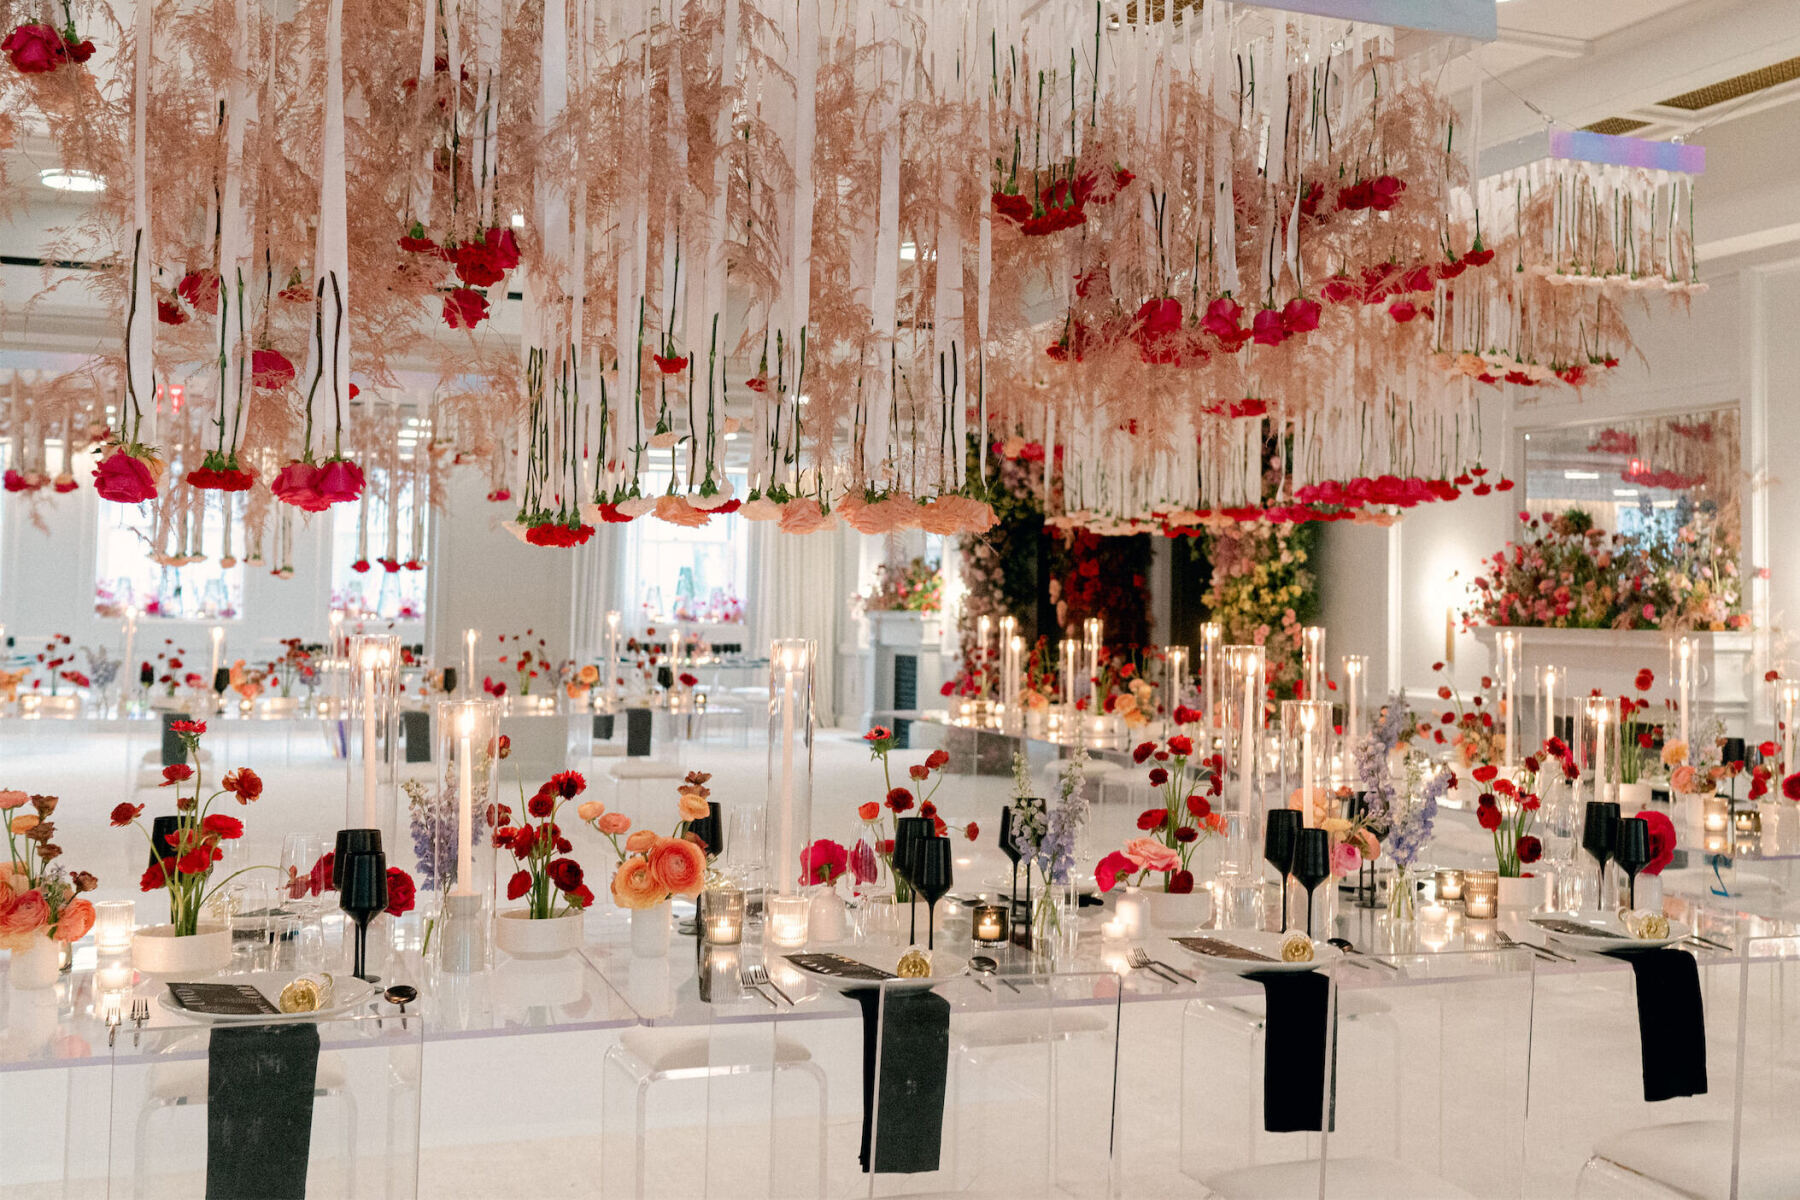 The ballroom of The Line Hotel in DC decorated in shades of black, white, pink, and red, using modern rental furniture, a hanging floral installation, and Ikebana style table centerpieces.